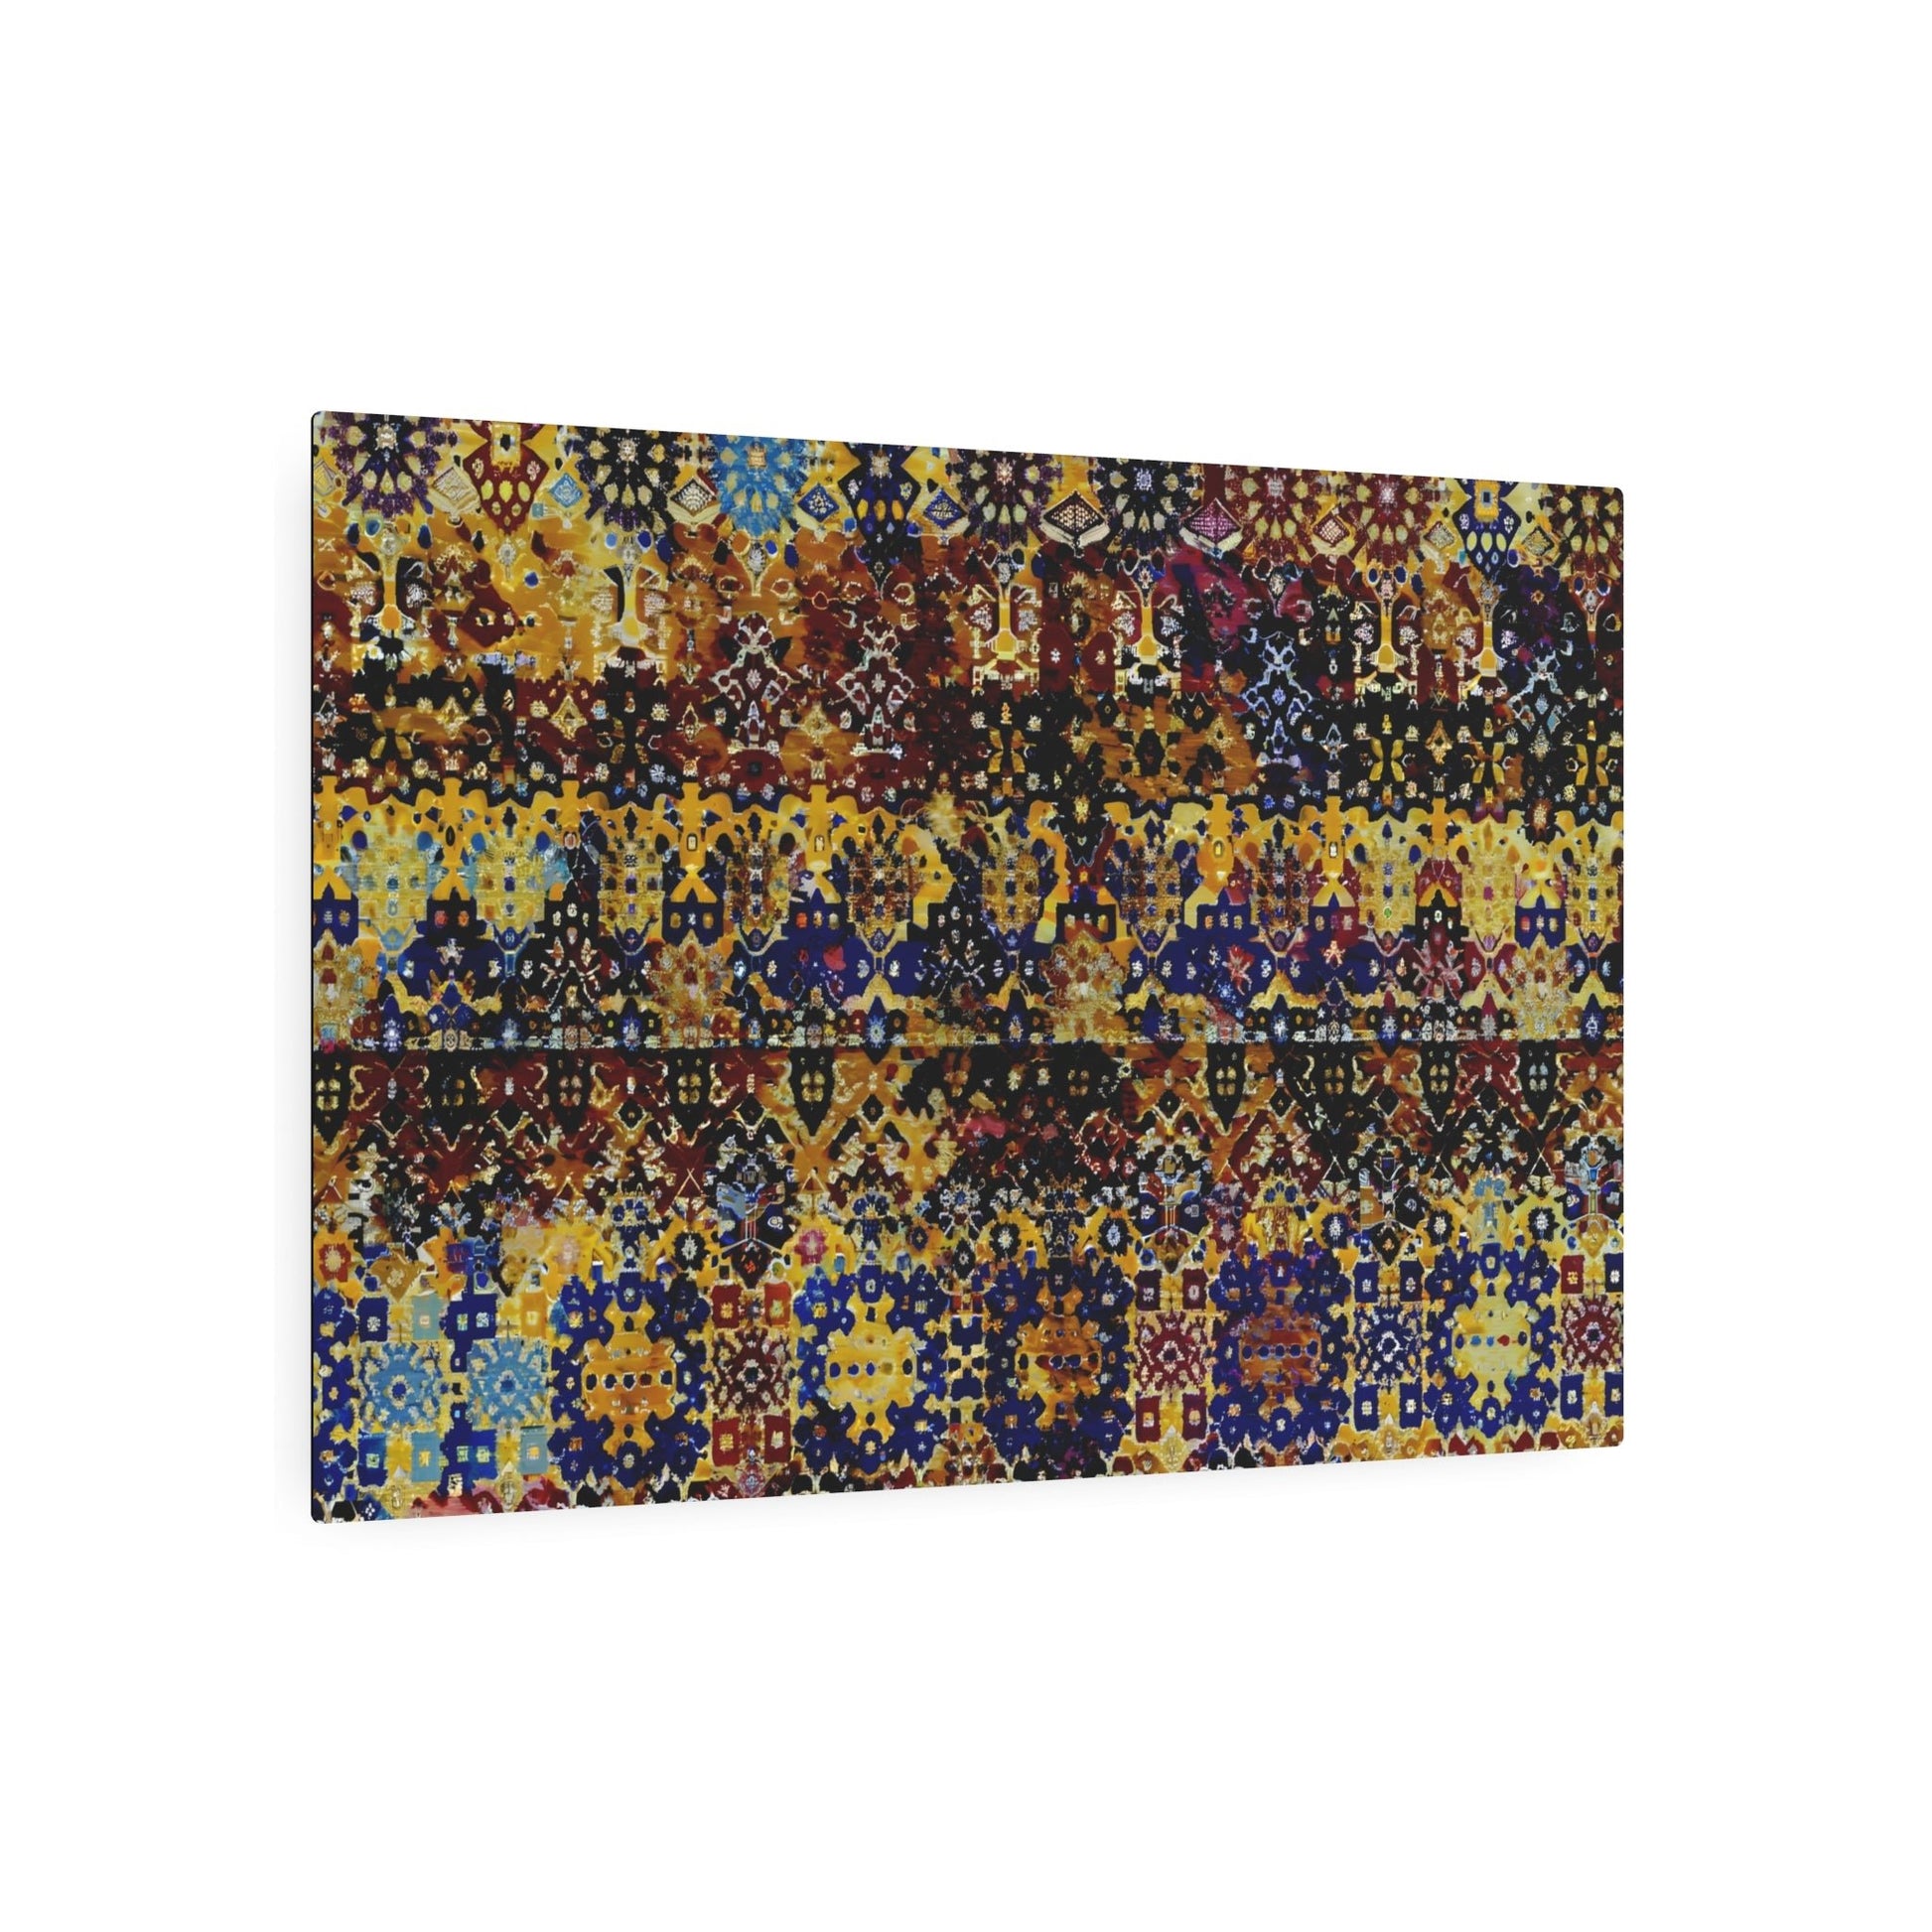 Metal Poster Art | "Indonesian Batik Style Artwork Featuring Intricate Patterns & Vibrant Colors - Non-Western Global Styles Collection" - Metal Poster Art 36″ x 24″ (Horizontal) 0.12''